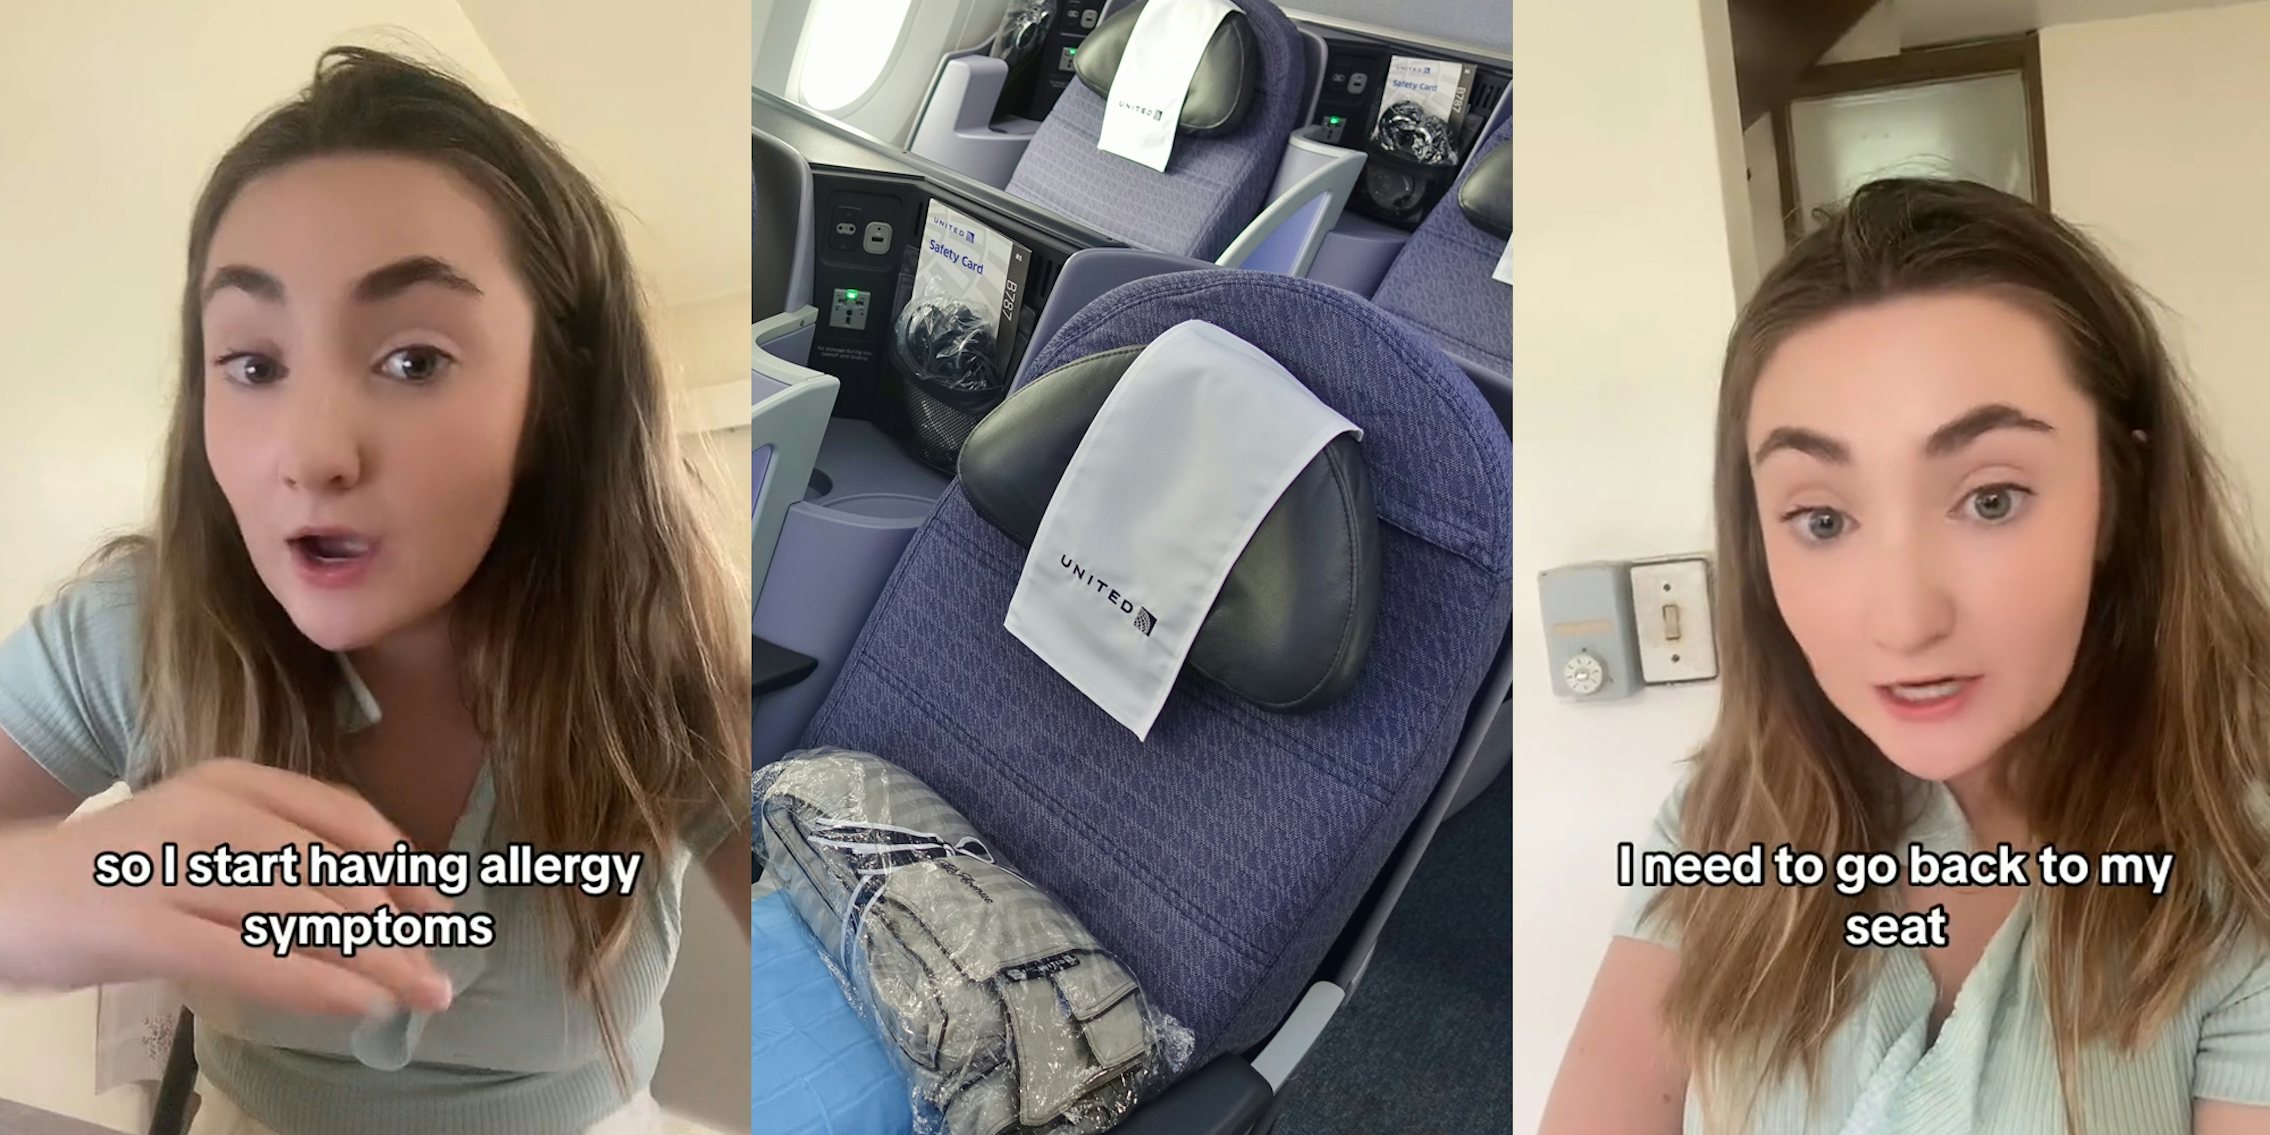 United Airlines passenger speaking with caption 'so I start having allergy symptoms' (l) United Airlines plane interior seats (c) United Airlines passenger speaking with caption 'I need to go back to my seat' (r)